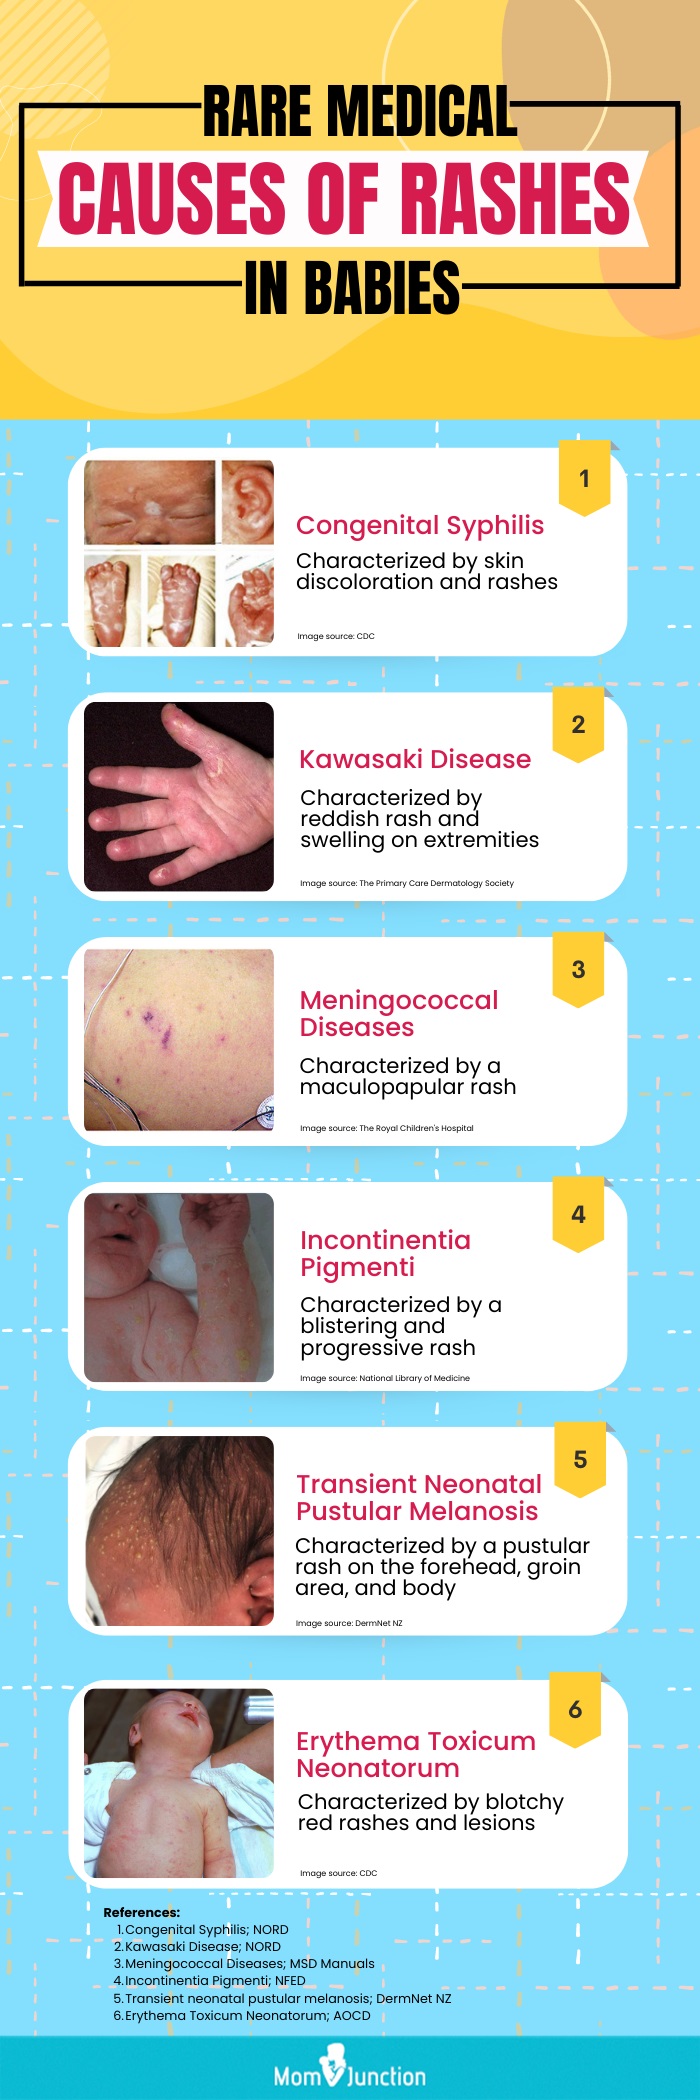 rare medical causes of rashes in babies [infographic]